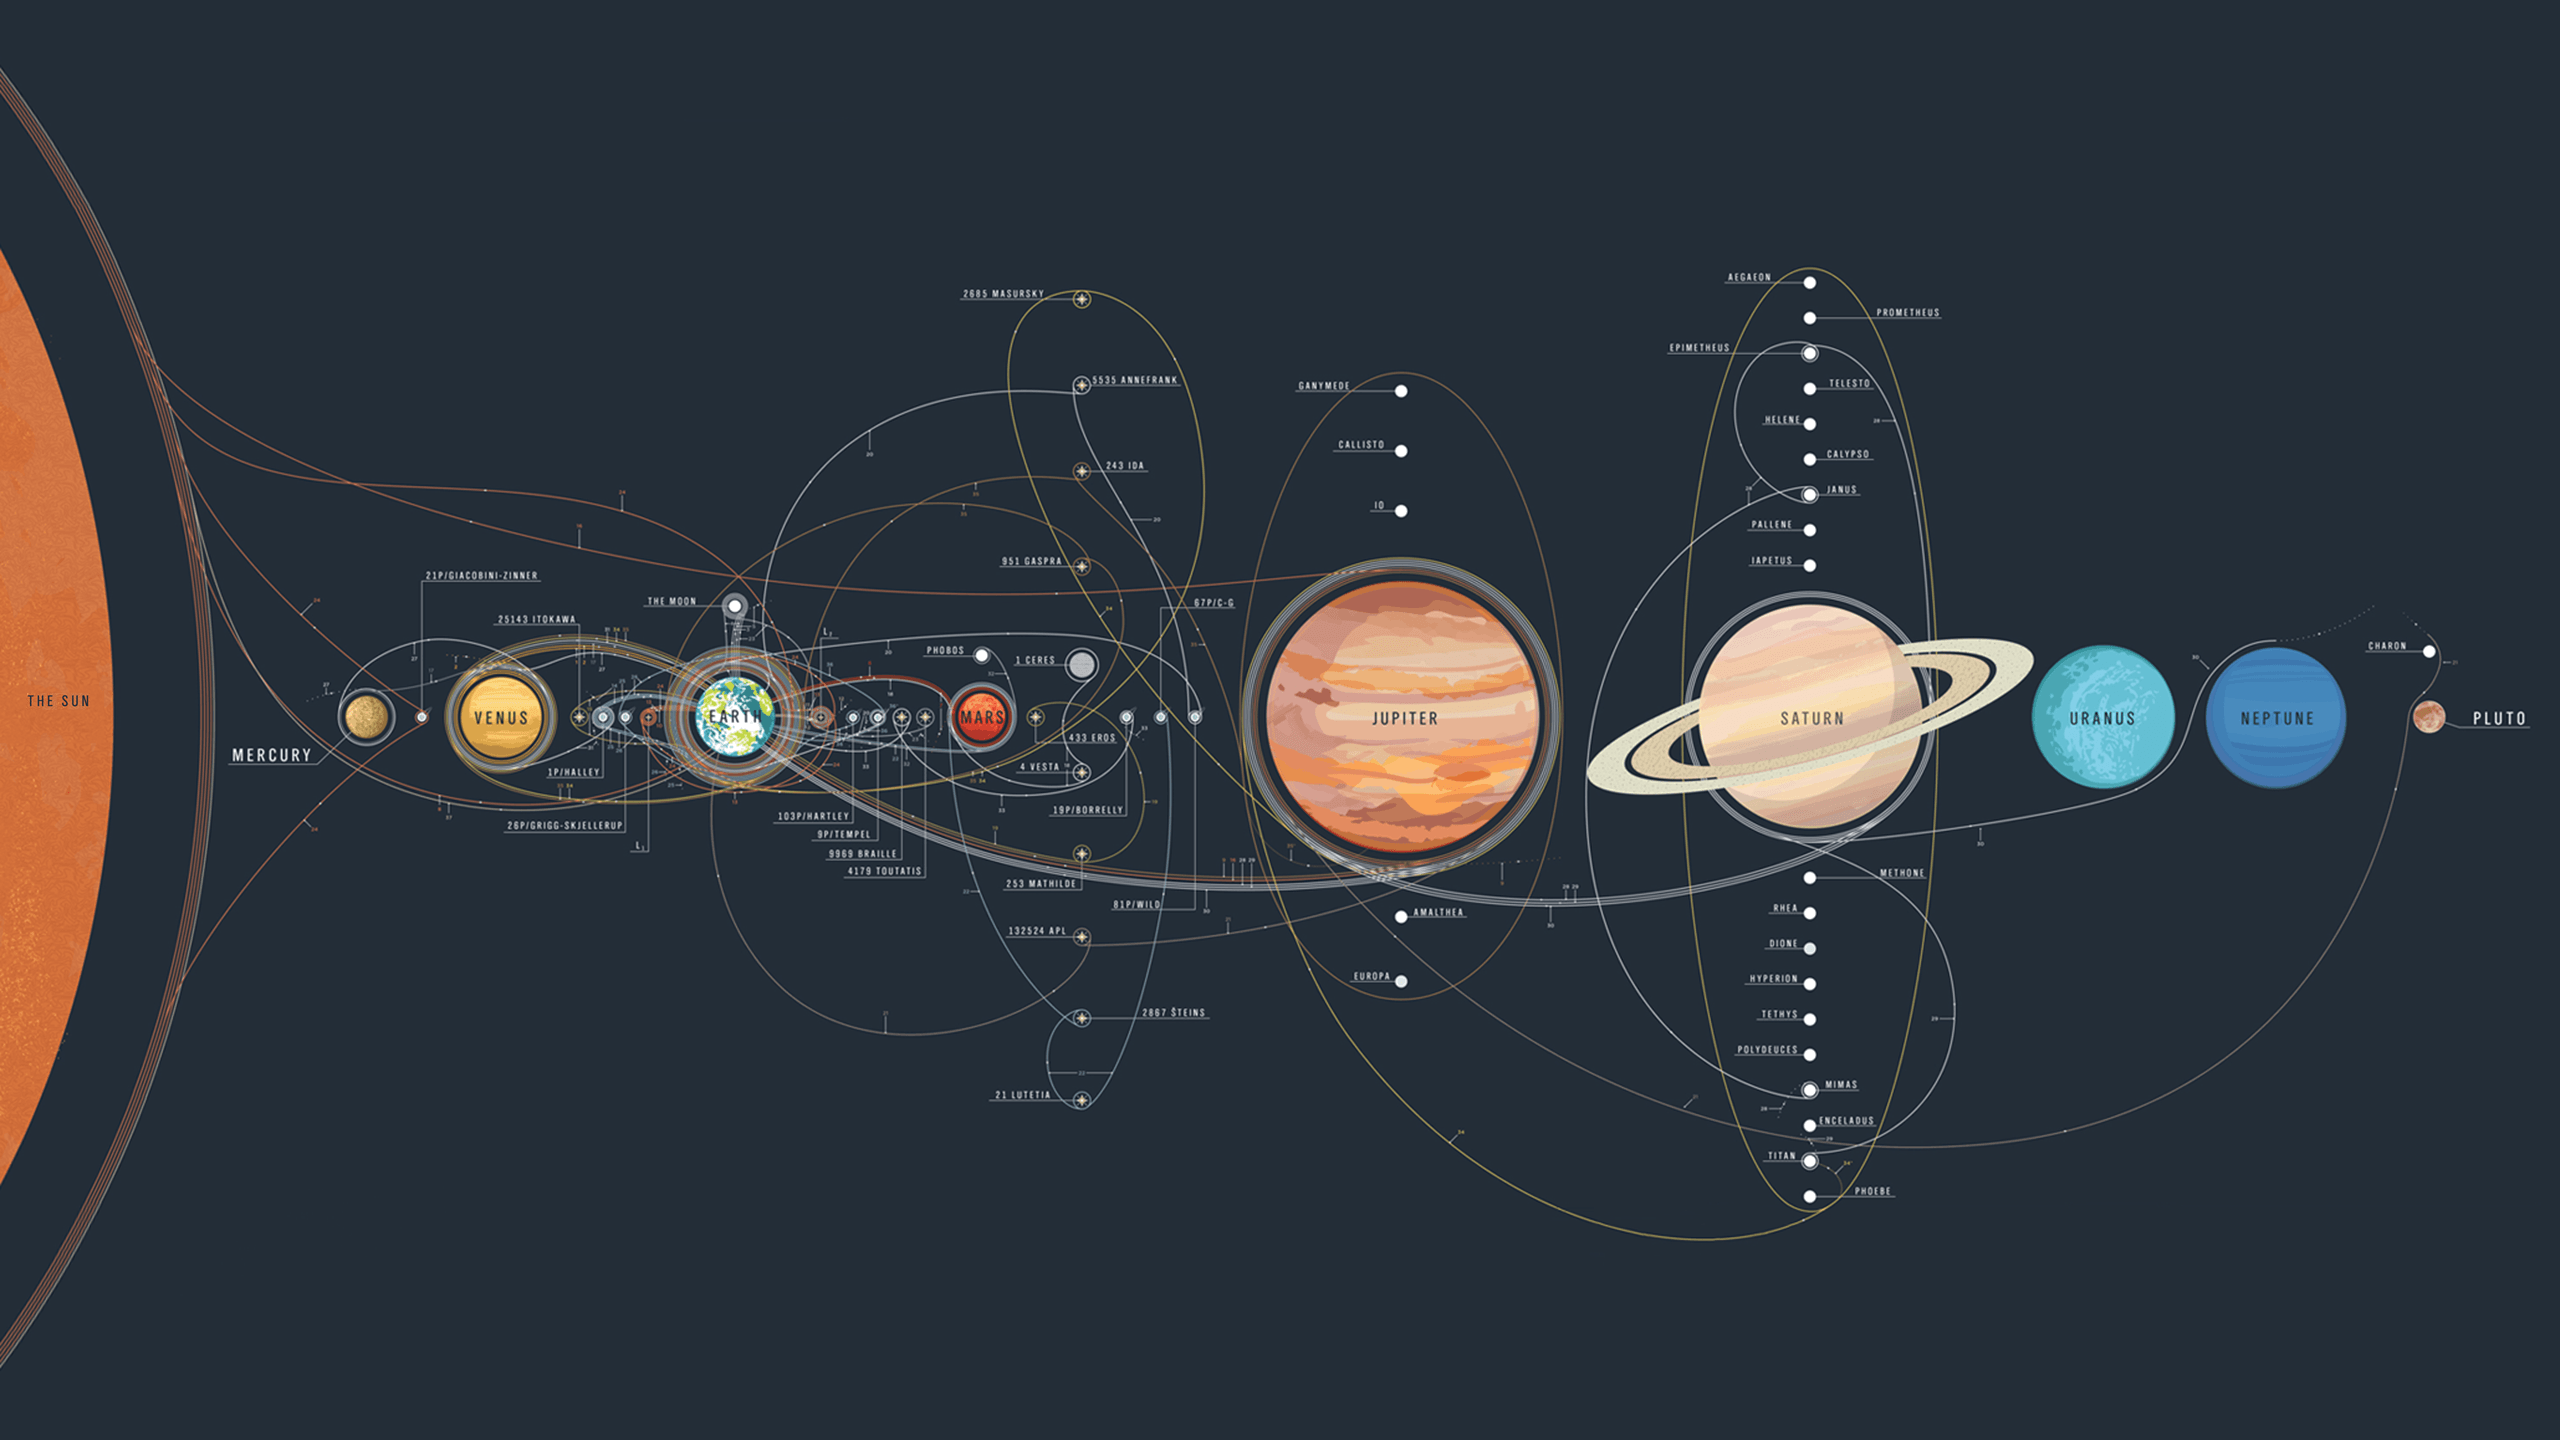 The history of space exploration in a single map [1920x1080]